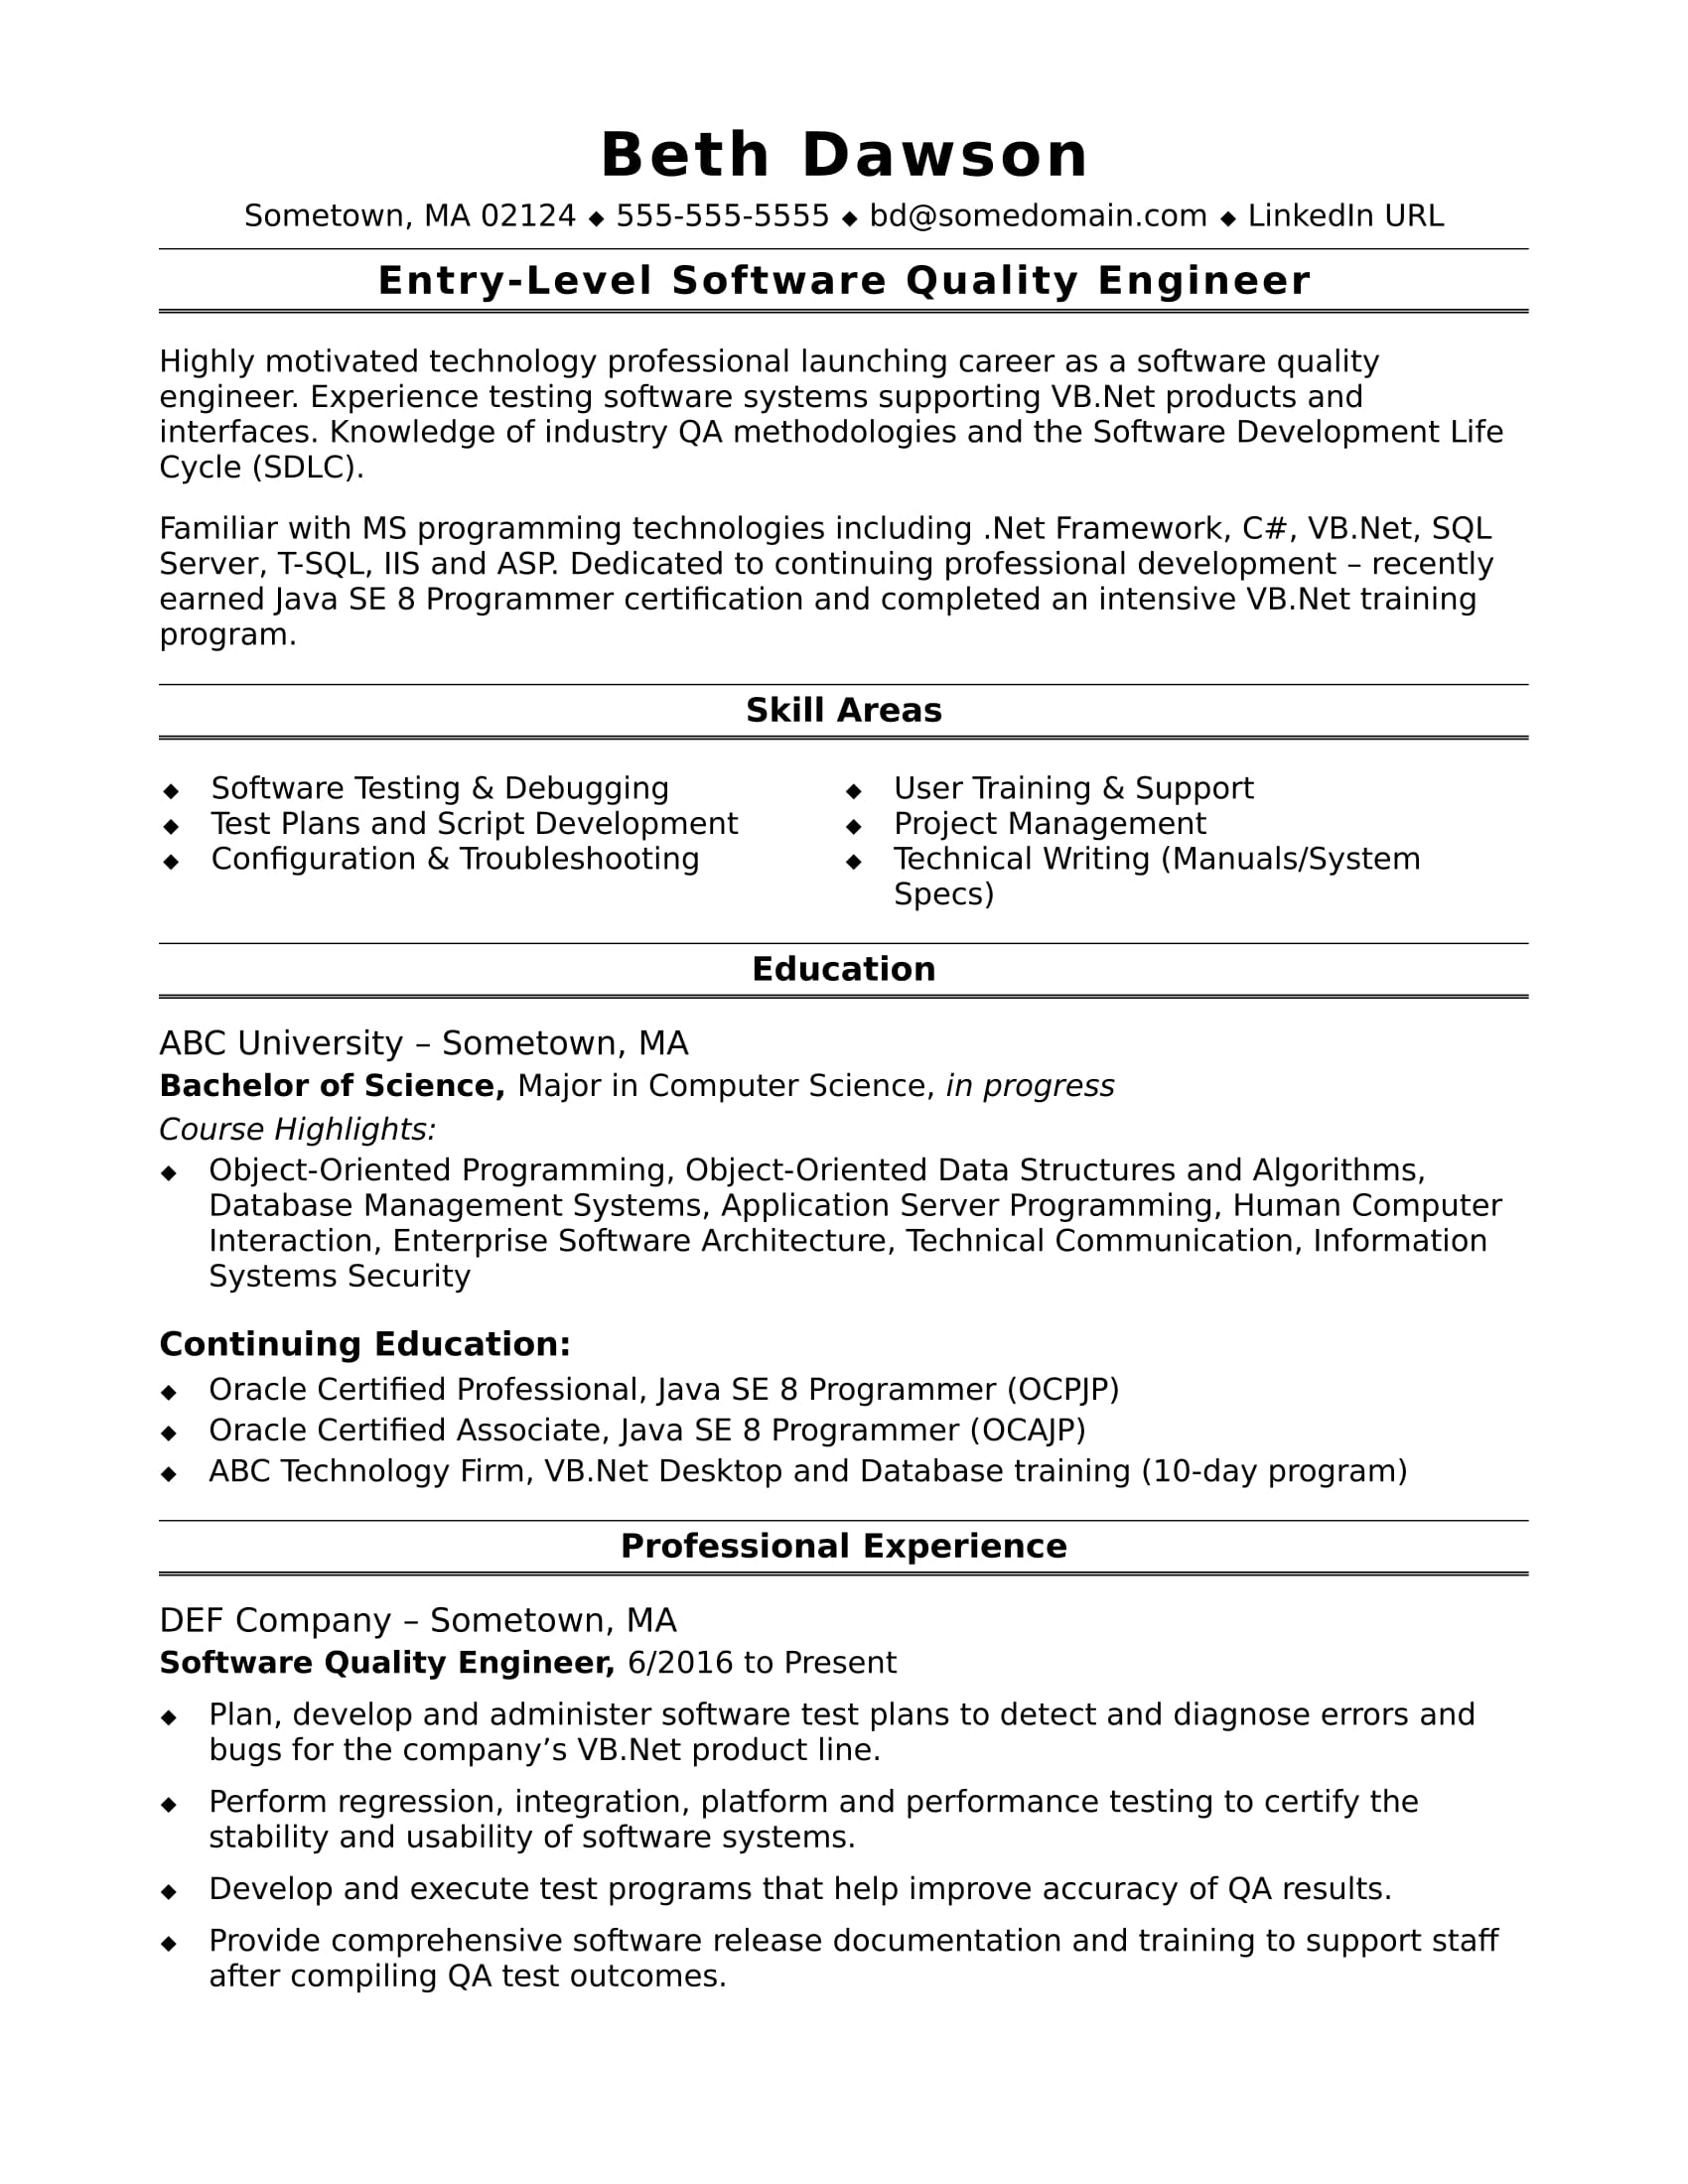 Sample Resume for an Entry-Level Quality Engineer ...